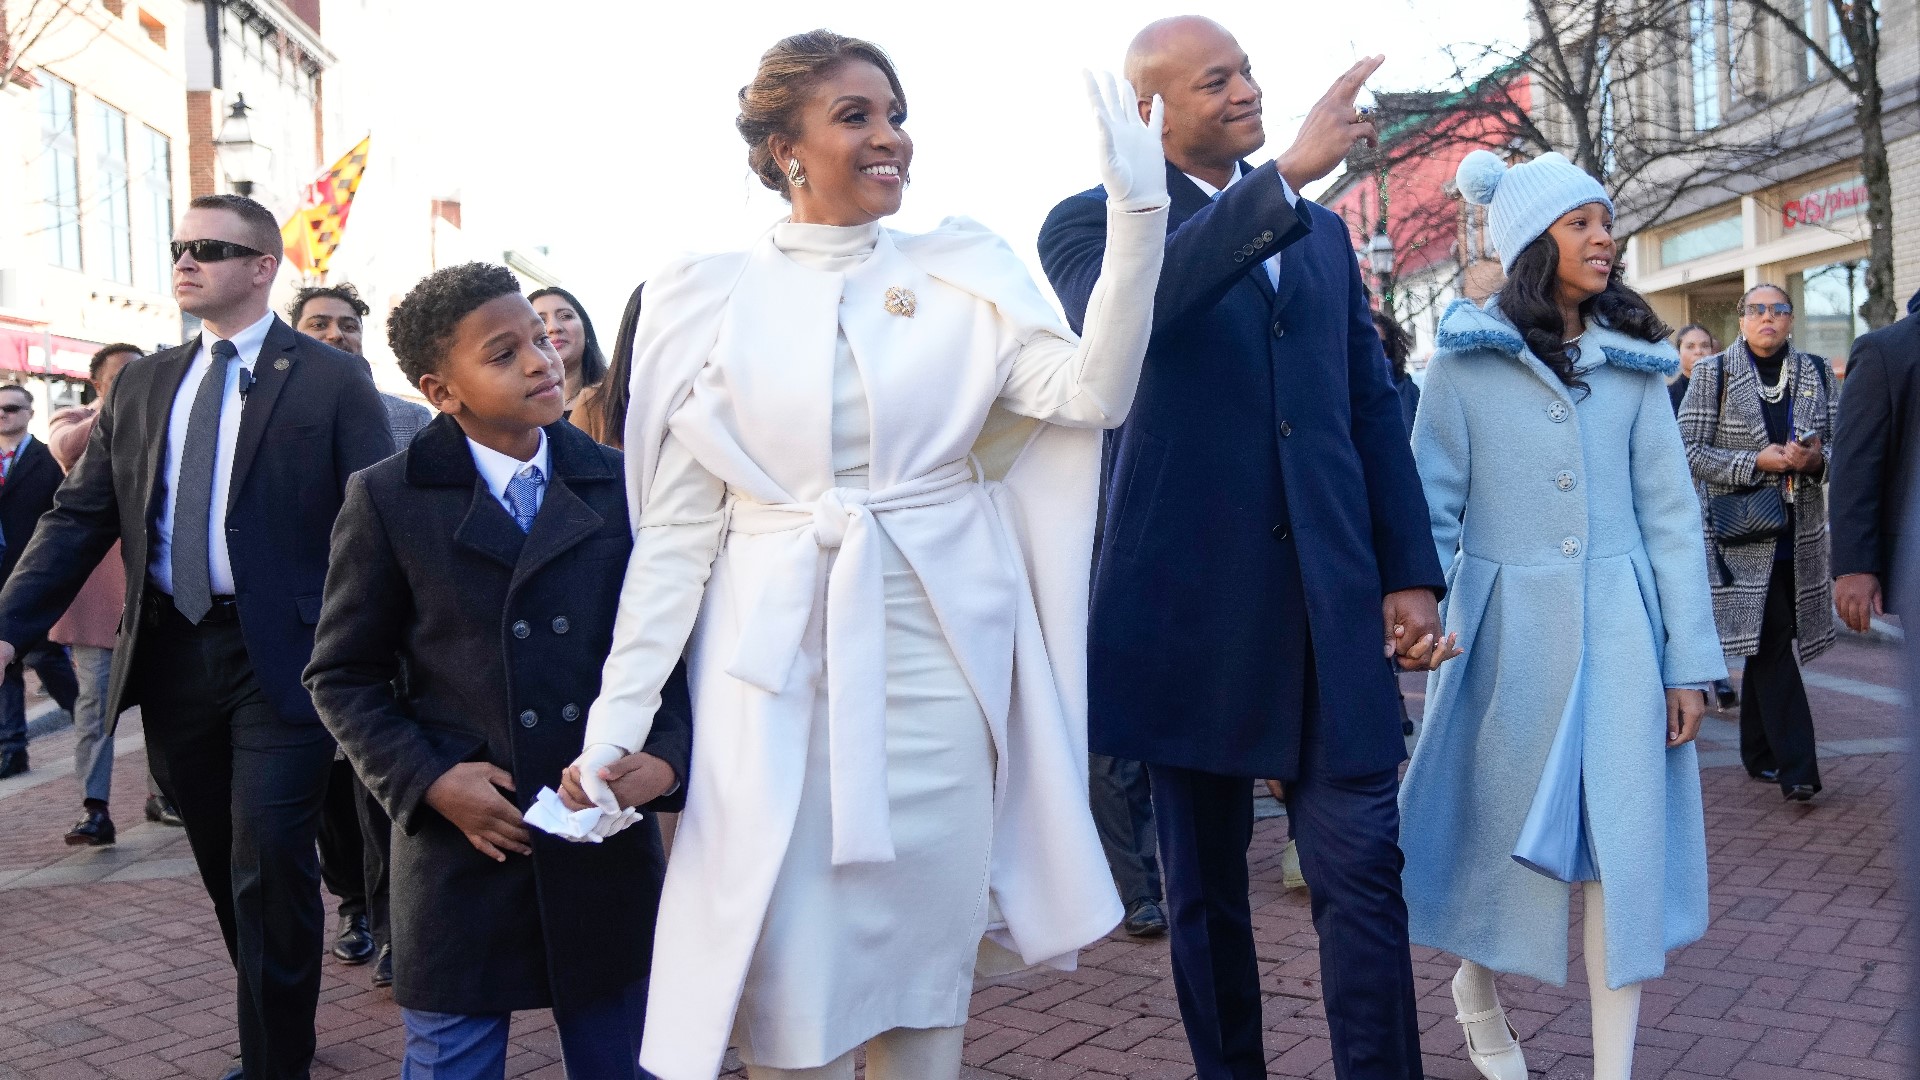 Fashion stylists, Lana Rae and Maria Williams, share their inspiration for styling the First Lady of Maryland during Inauguration festivities.